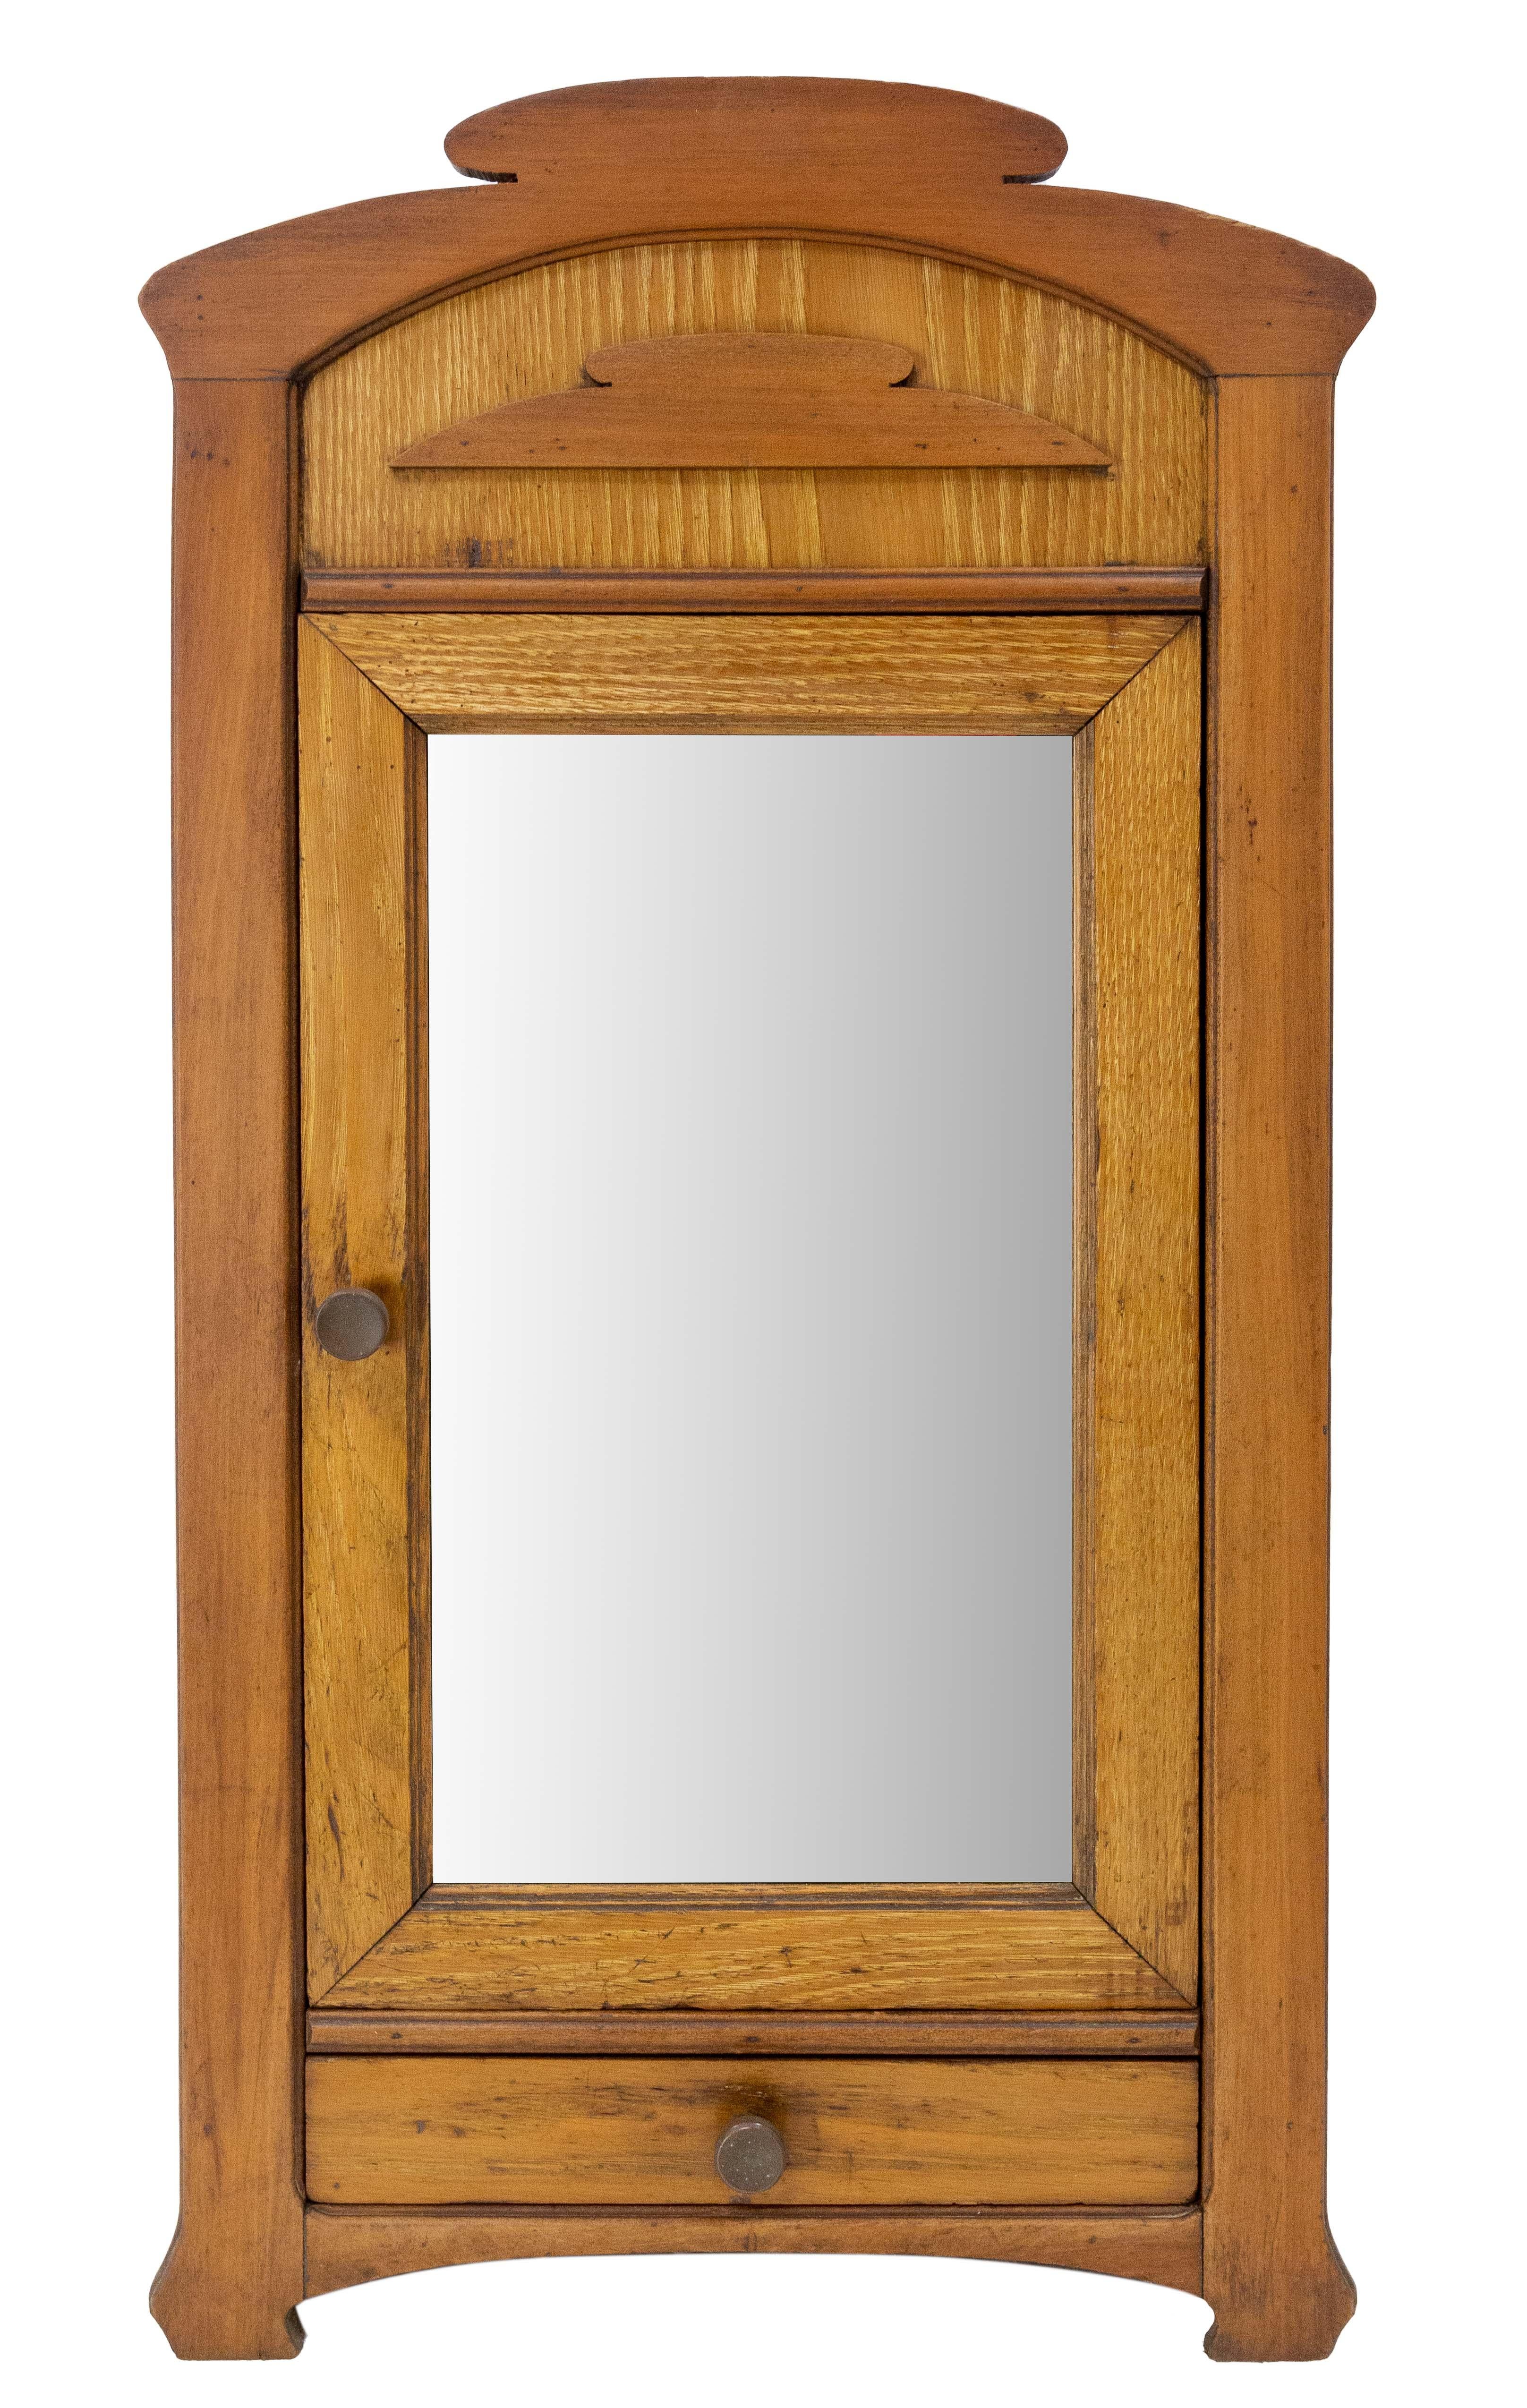 French mirror door wall cabinet.
Art nouveau chestnut bathroom cabinet.
Two shelves and one drawer.
Made circa 1900.
Good condition.

Shipping:
L34 P17 H64 3,3 Kg.
 